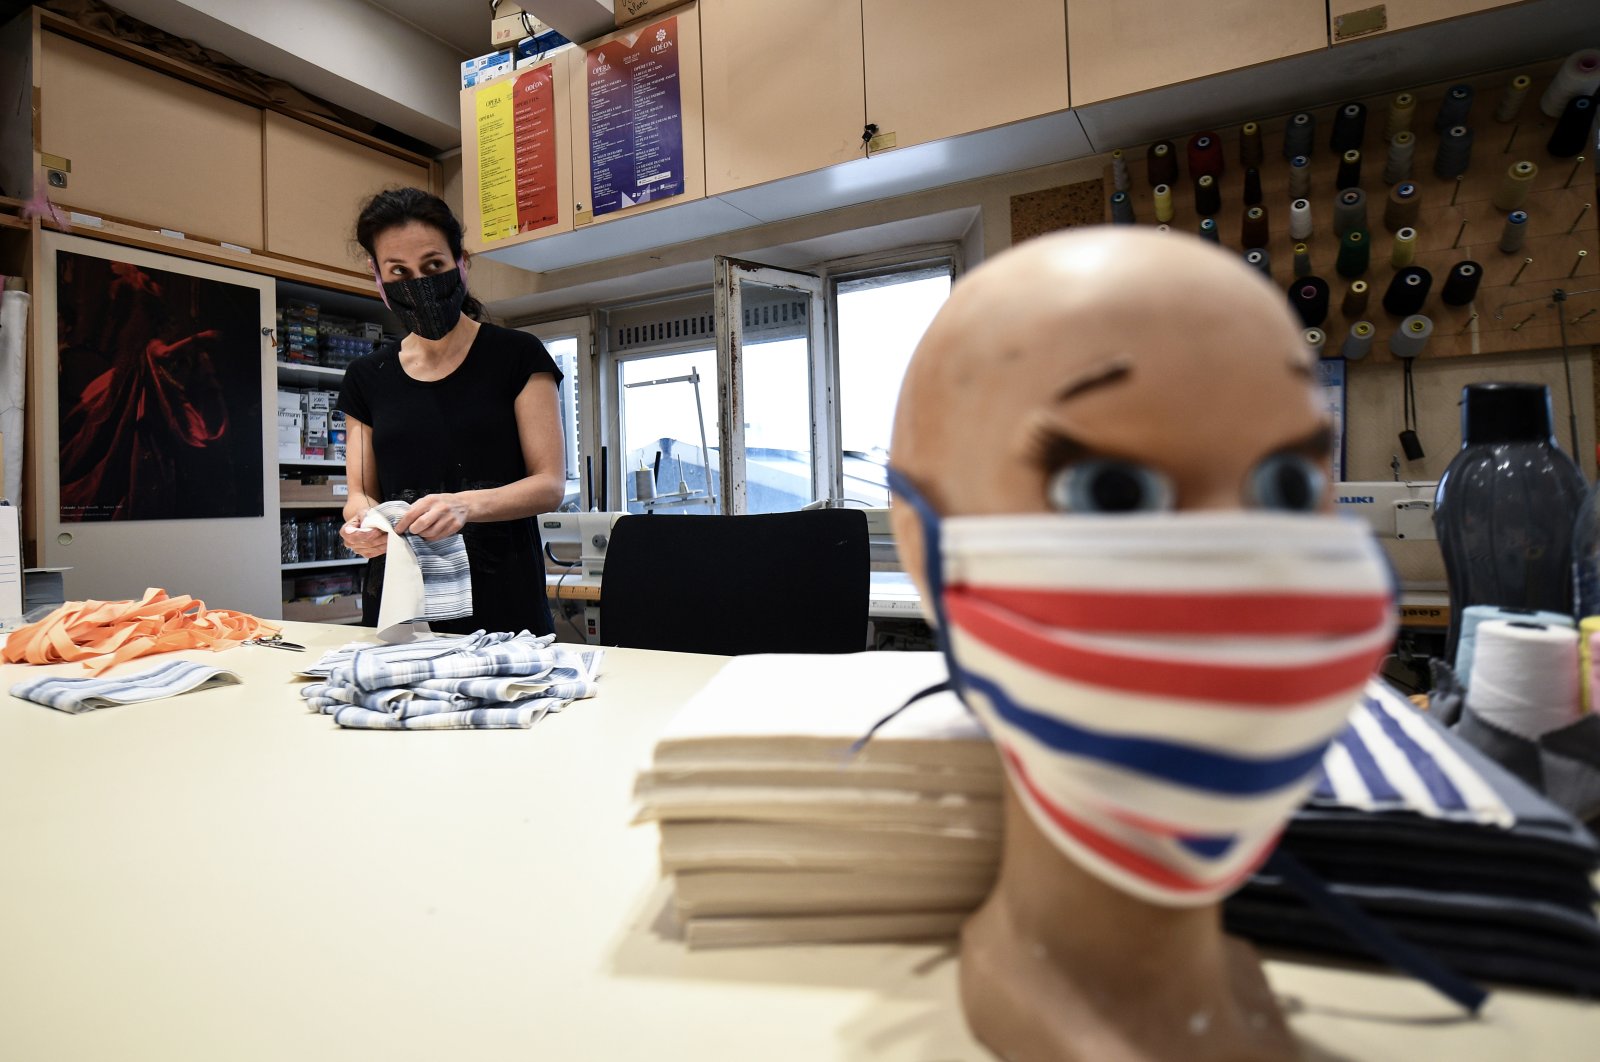 A seamstress from the Opera de Marseille makes face masks out of fabric in the sewing workshop of the Marseille opera house, April 20, 2020, in Marseille, southeastern France. (AFP Photo)